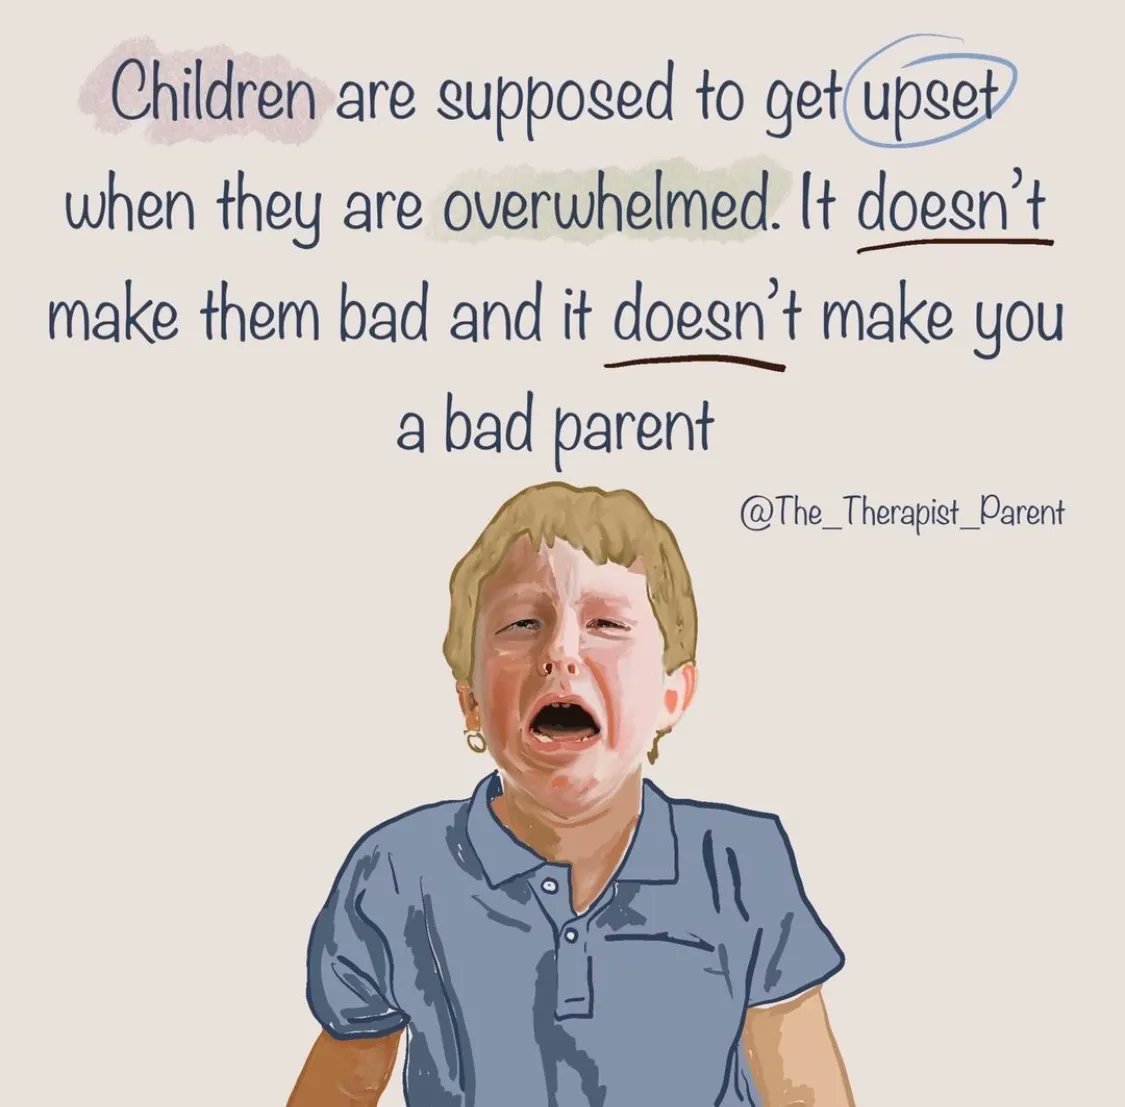 When our kids have a meltdown it’s easy to believe everyone is judging us as parents - maybe they are… but we all feel overwhelmed at times and this is how children express that. It doesn’t mean you’re doing anything wrong. #overwhelmed #children #parenting